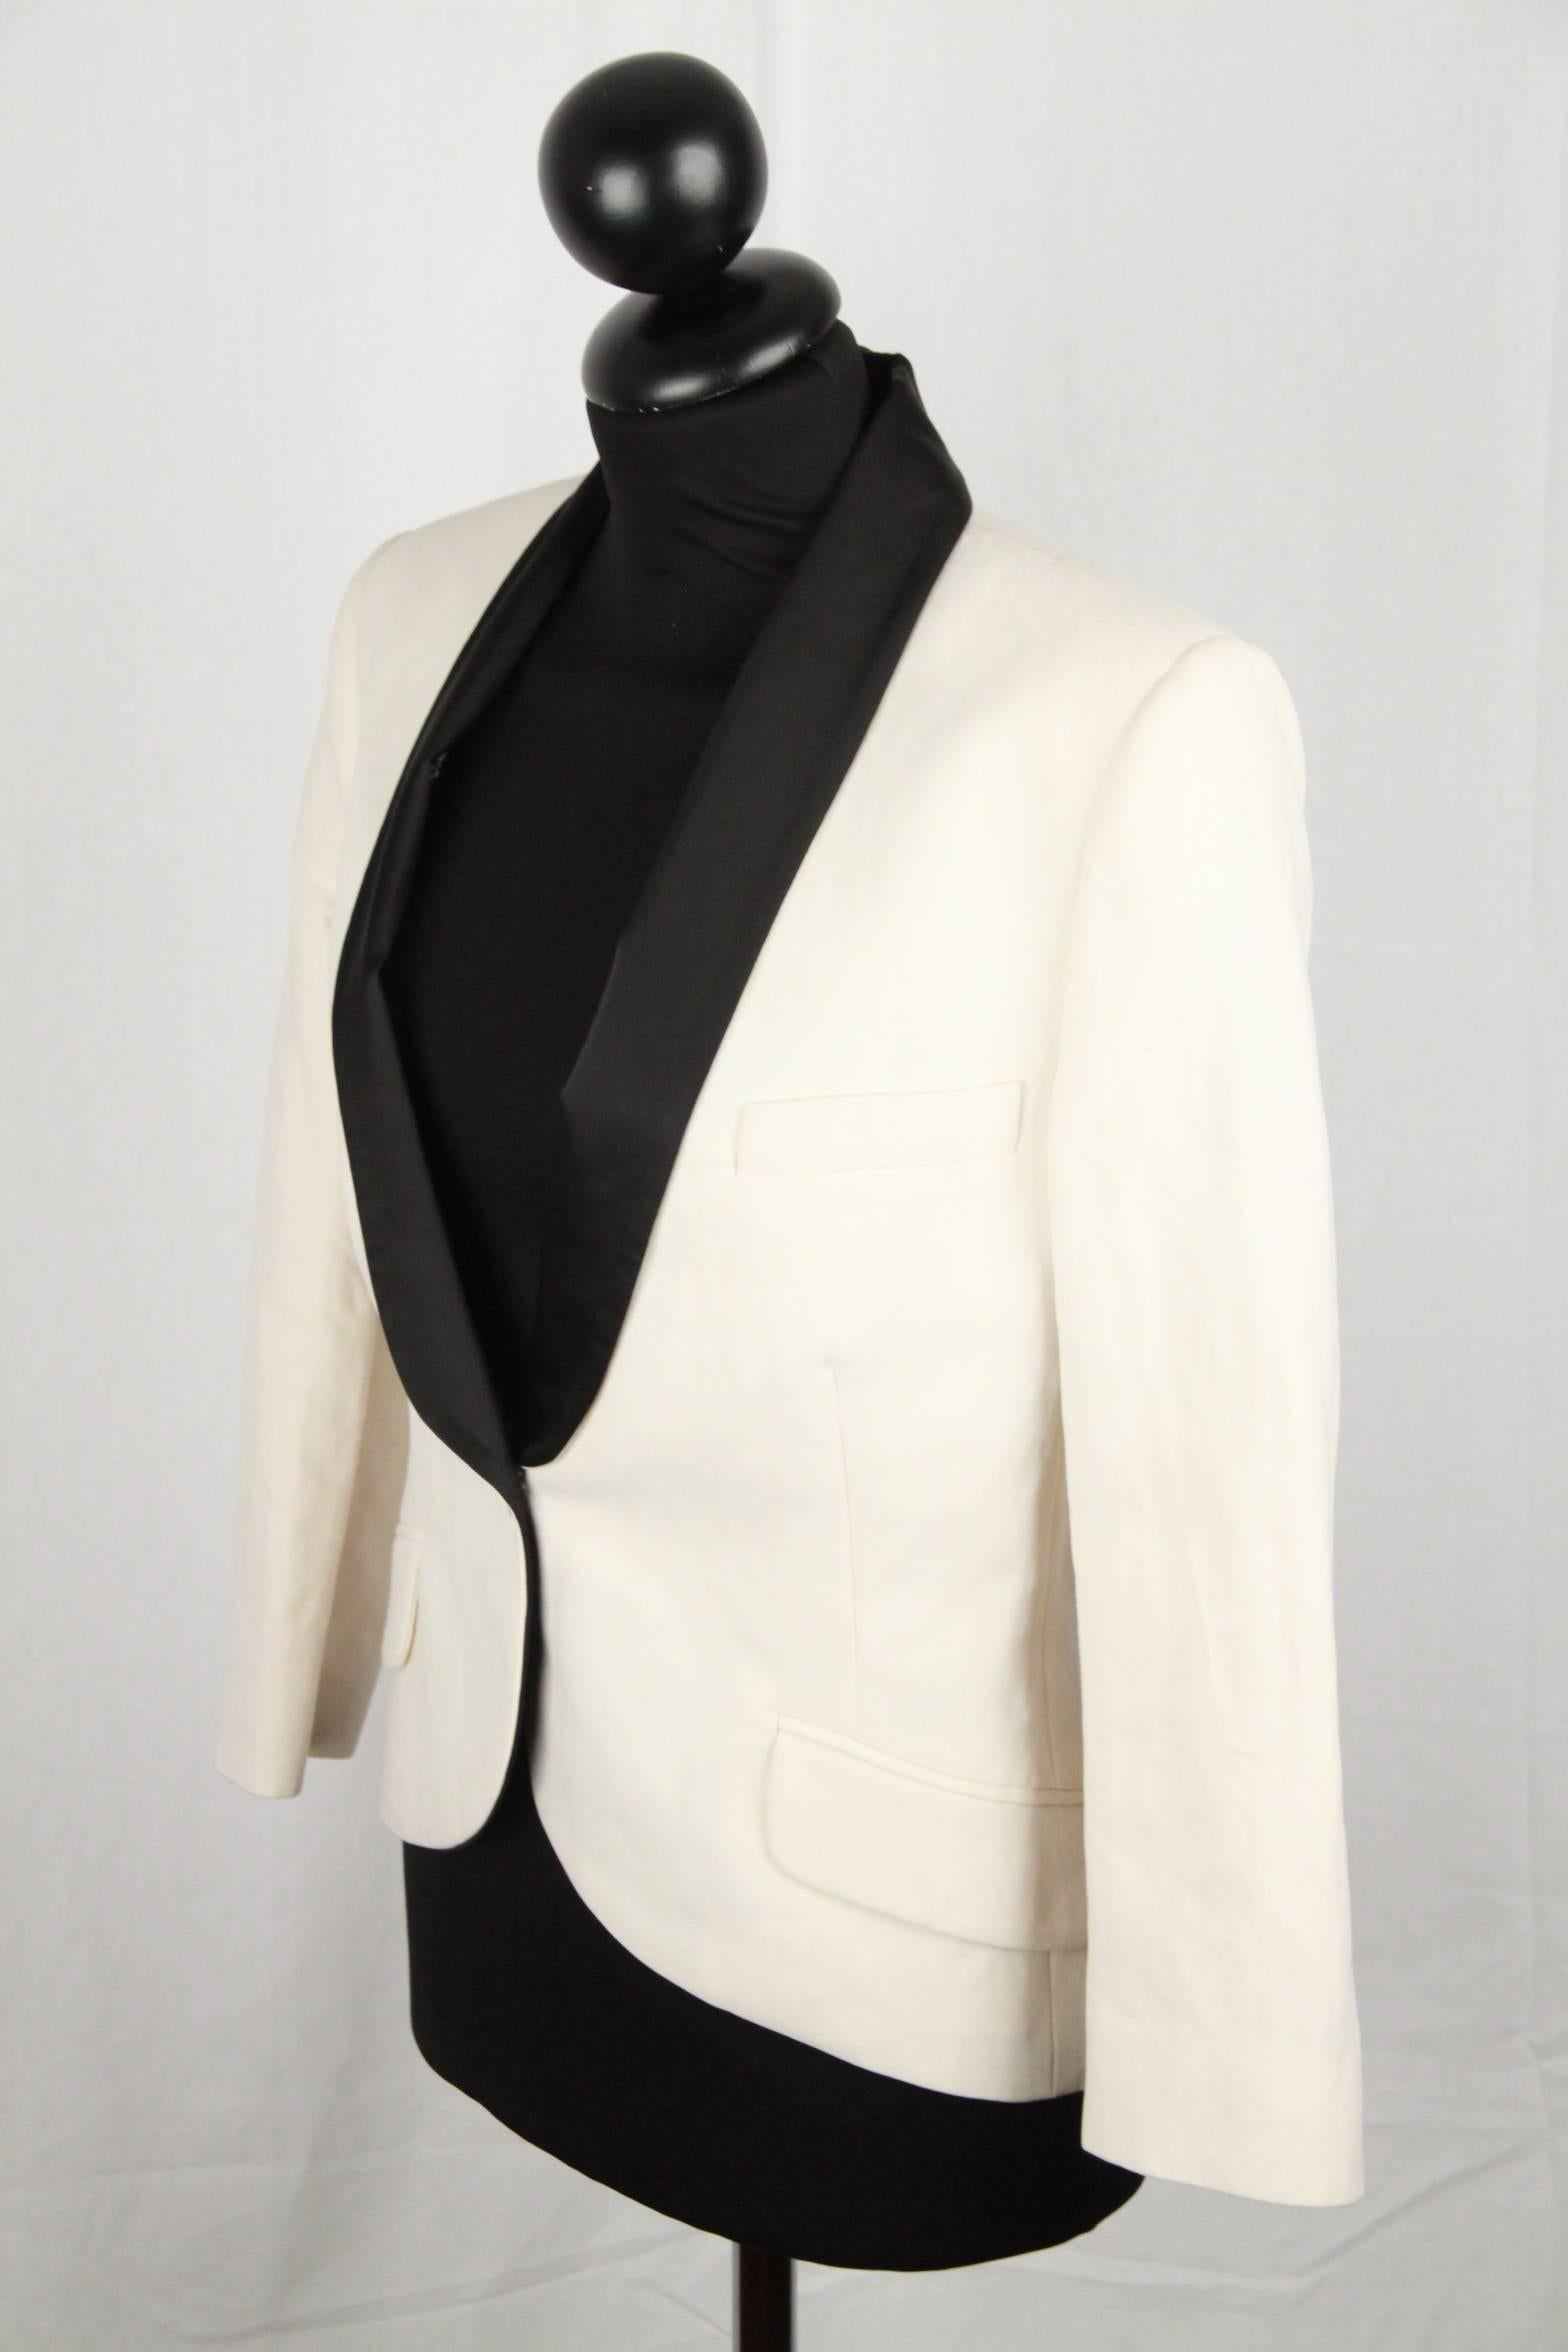 - Ivory tuxedo blazer by ALEXANDER McQUEEN
- Shawl black satin lapels
- One button closure
- Button cuffs
- Two front flap pockets
- 1 chest pocket & 1 interior pocket
- Lined
Logos / Tags: 'ALEXANDER McQUEEN' and  'Made in Italy' tag